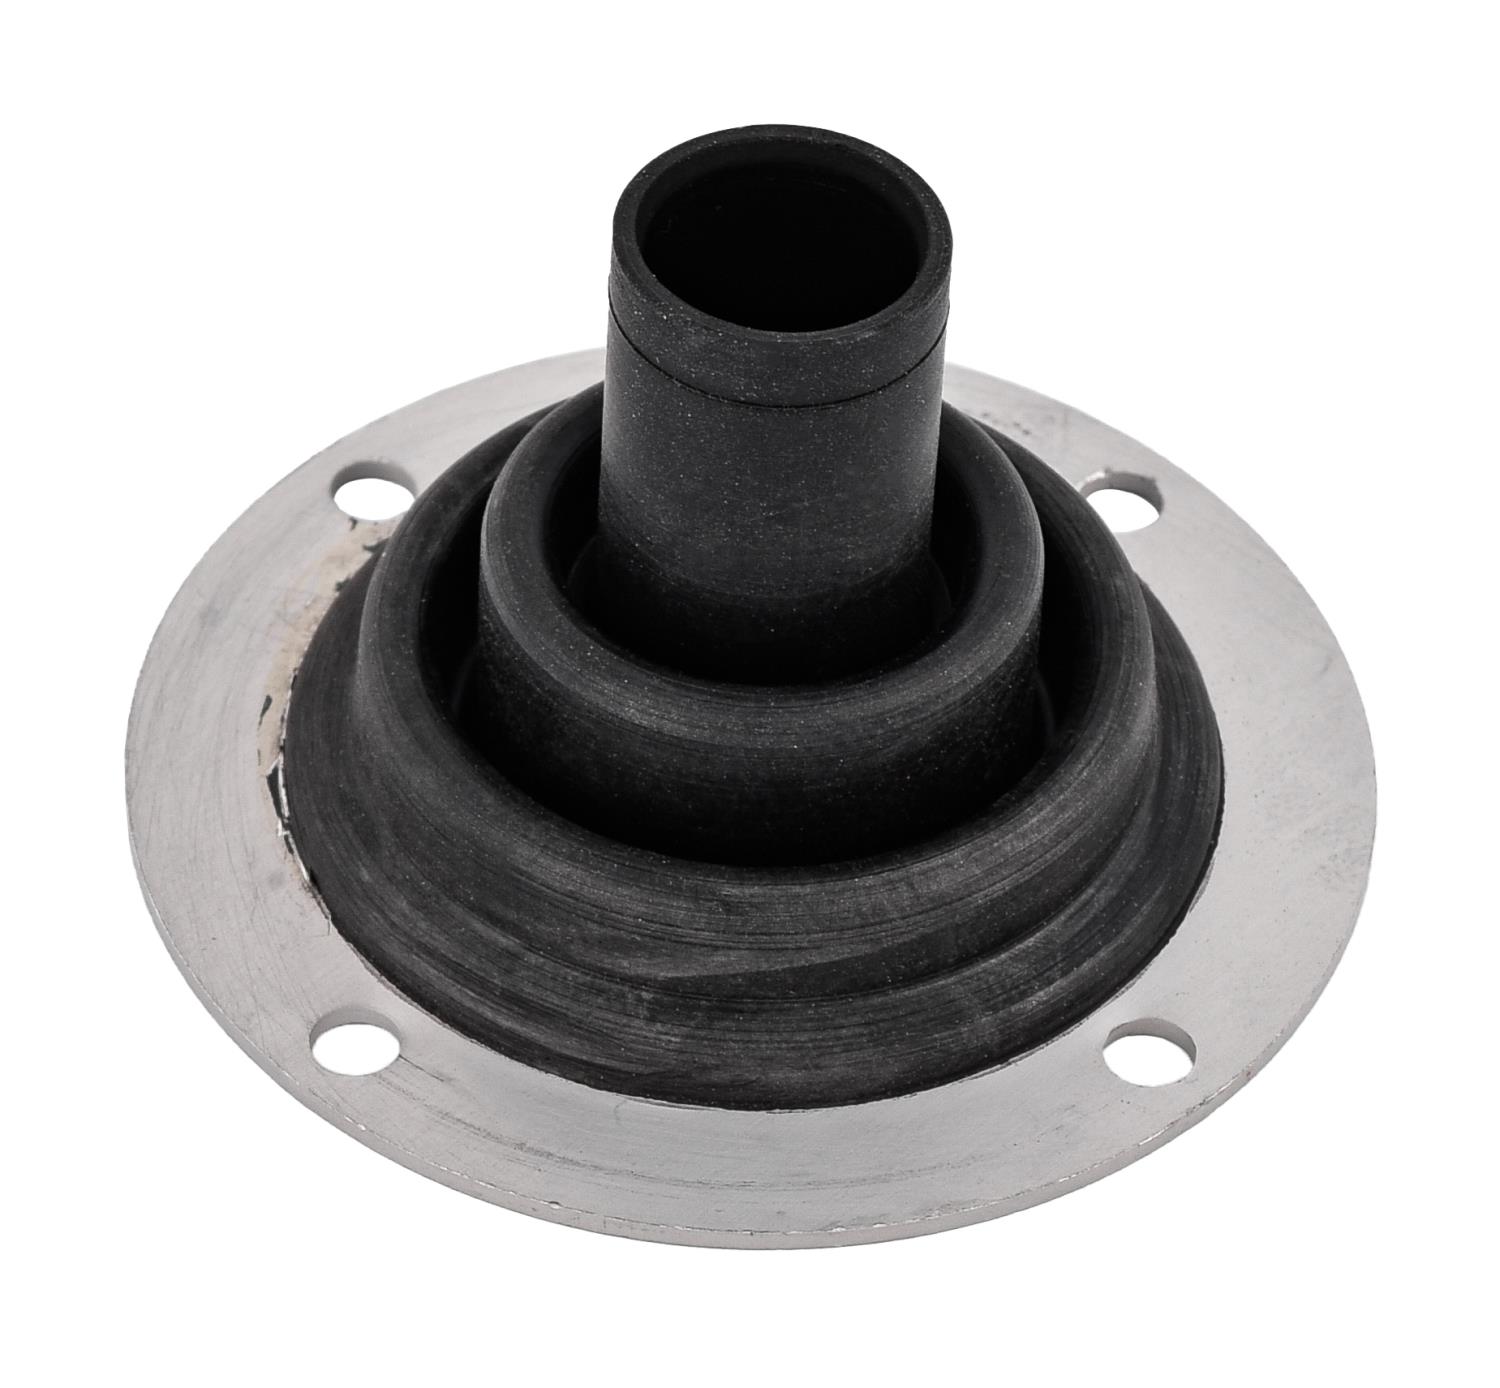 Firewall Grommet Seal, Extended Boot Style [.416 in. I.D. Hole]